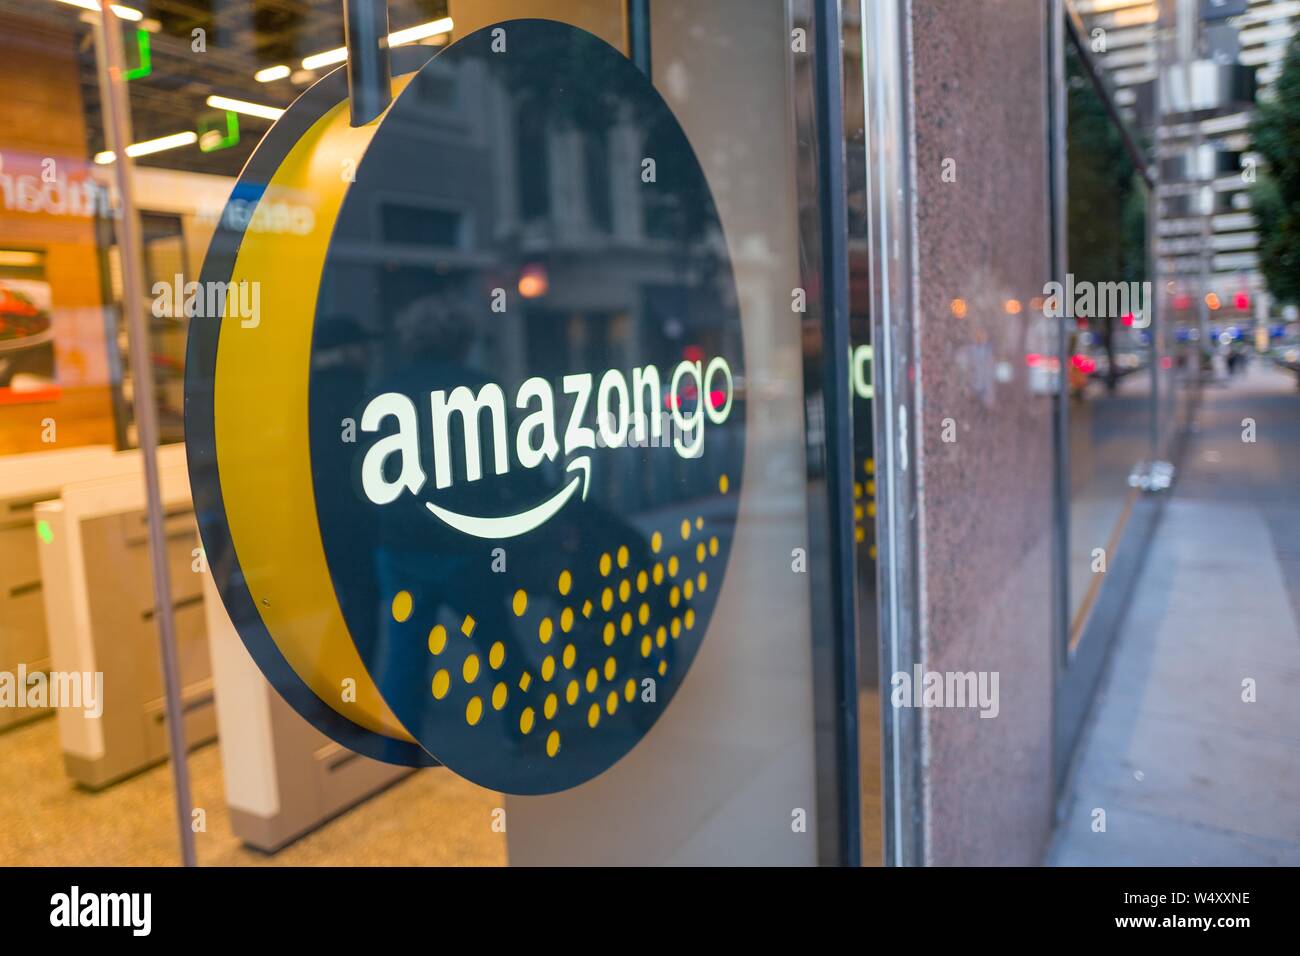 Facade with logo and sign at the Amazon Go concept store, a physical retail  store operated by Amazon in which shoppers are able to take items from  shelves and exit without a